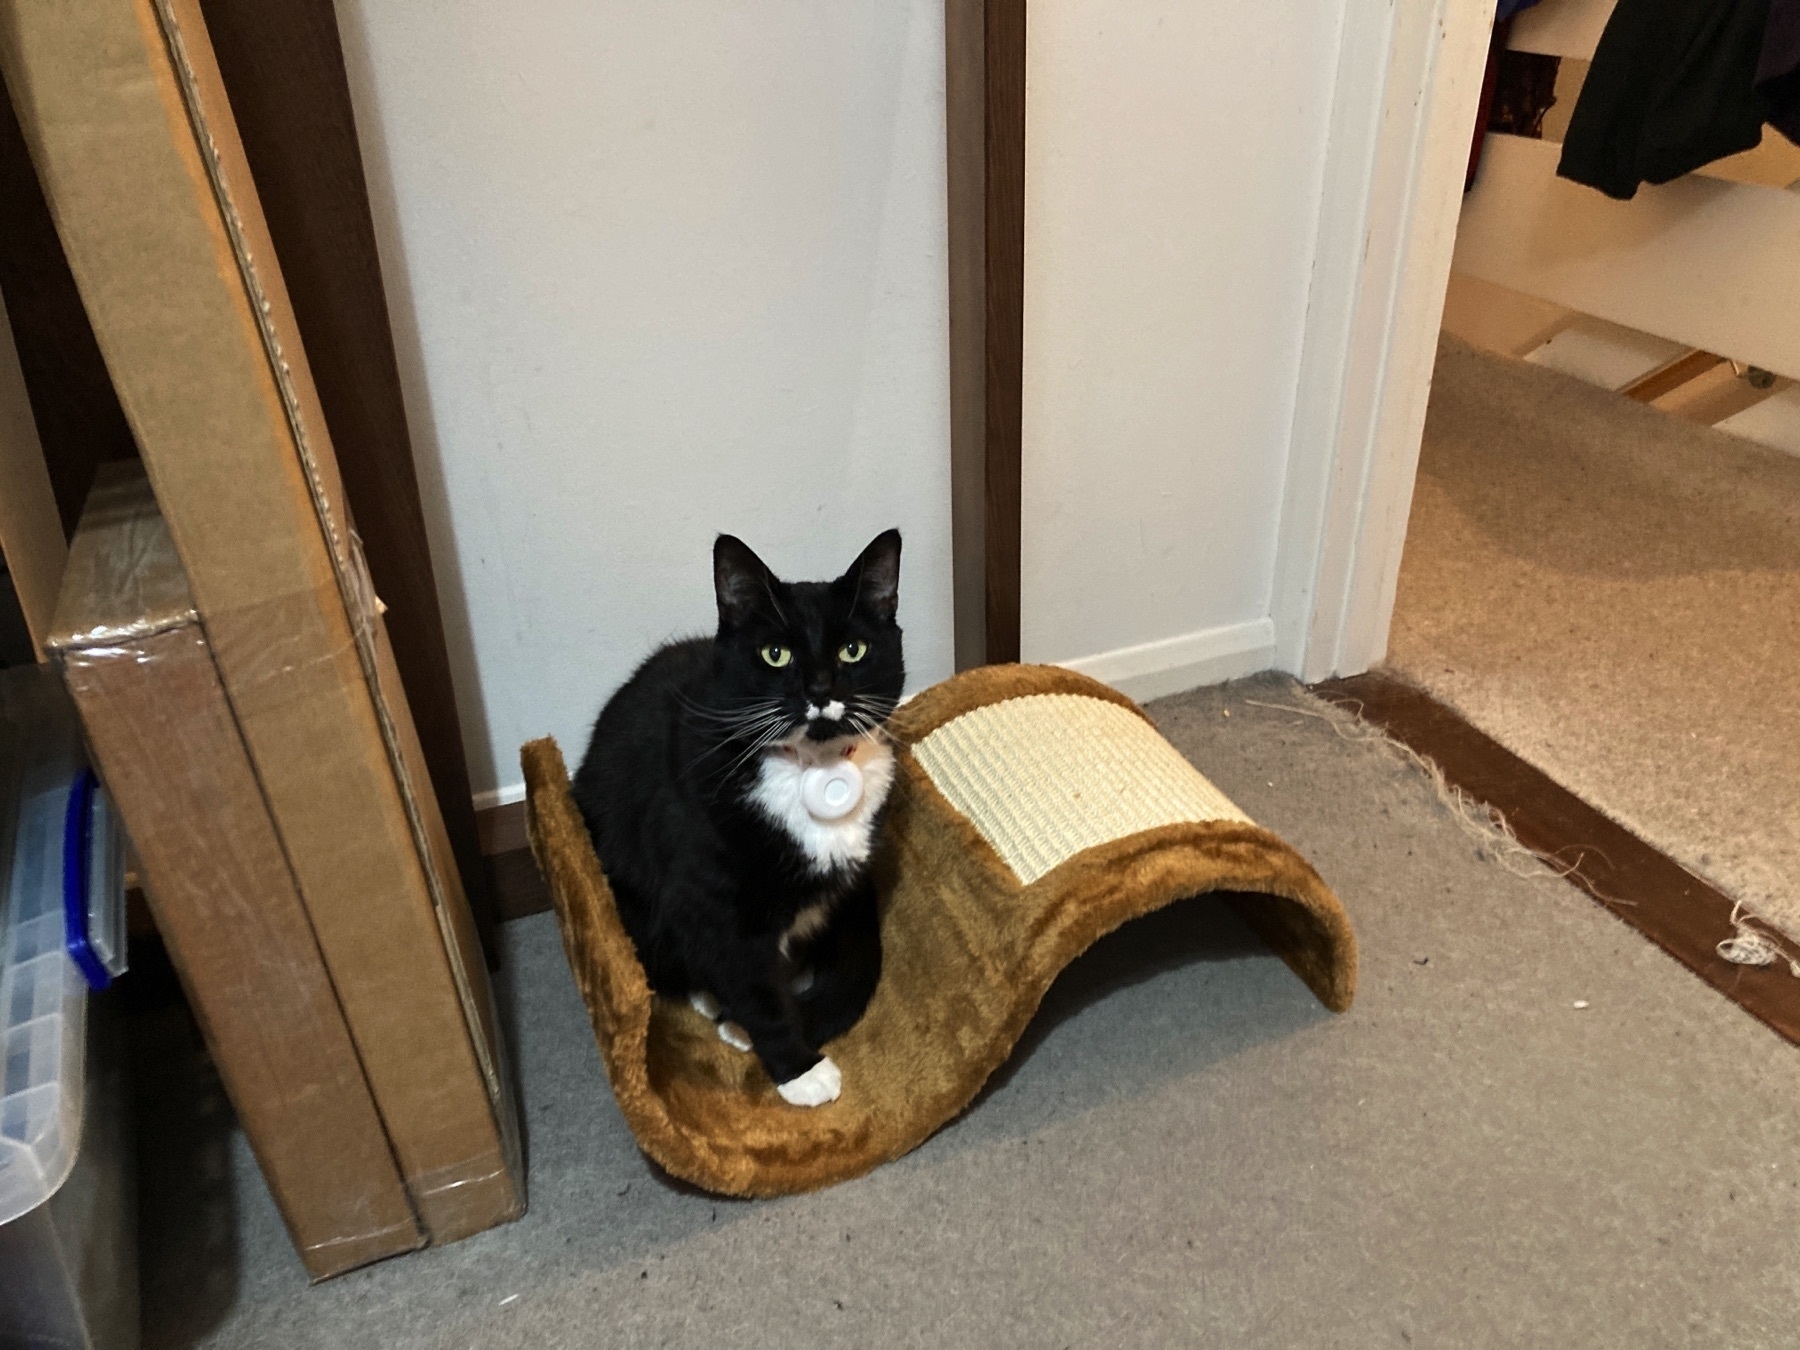 A black and white cat, sitting atop a scratching furniture toy, looking directly at the camera.